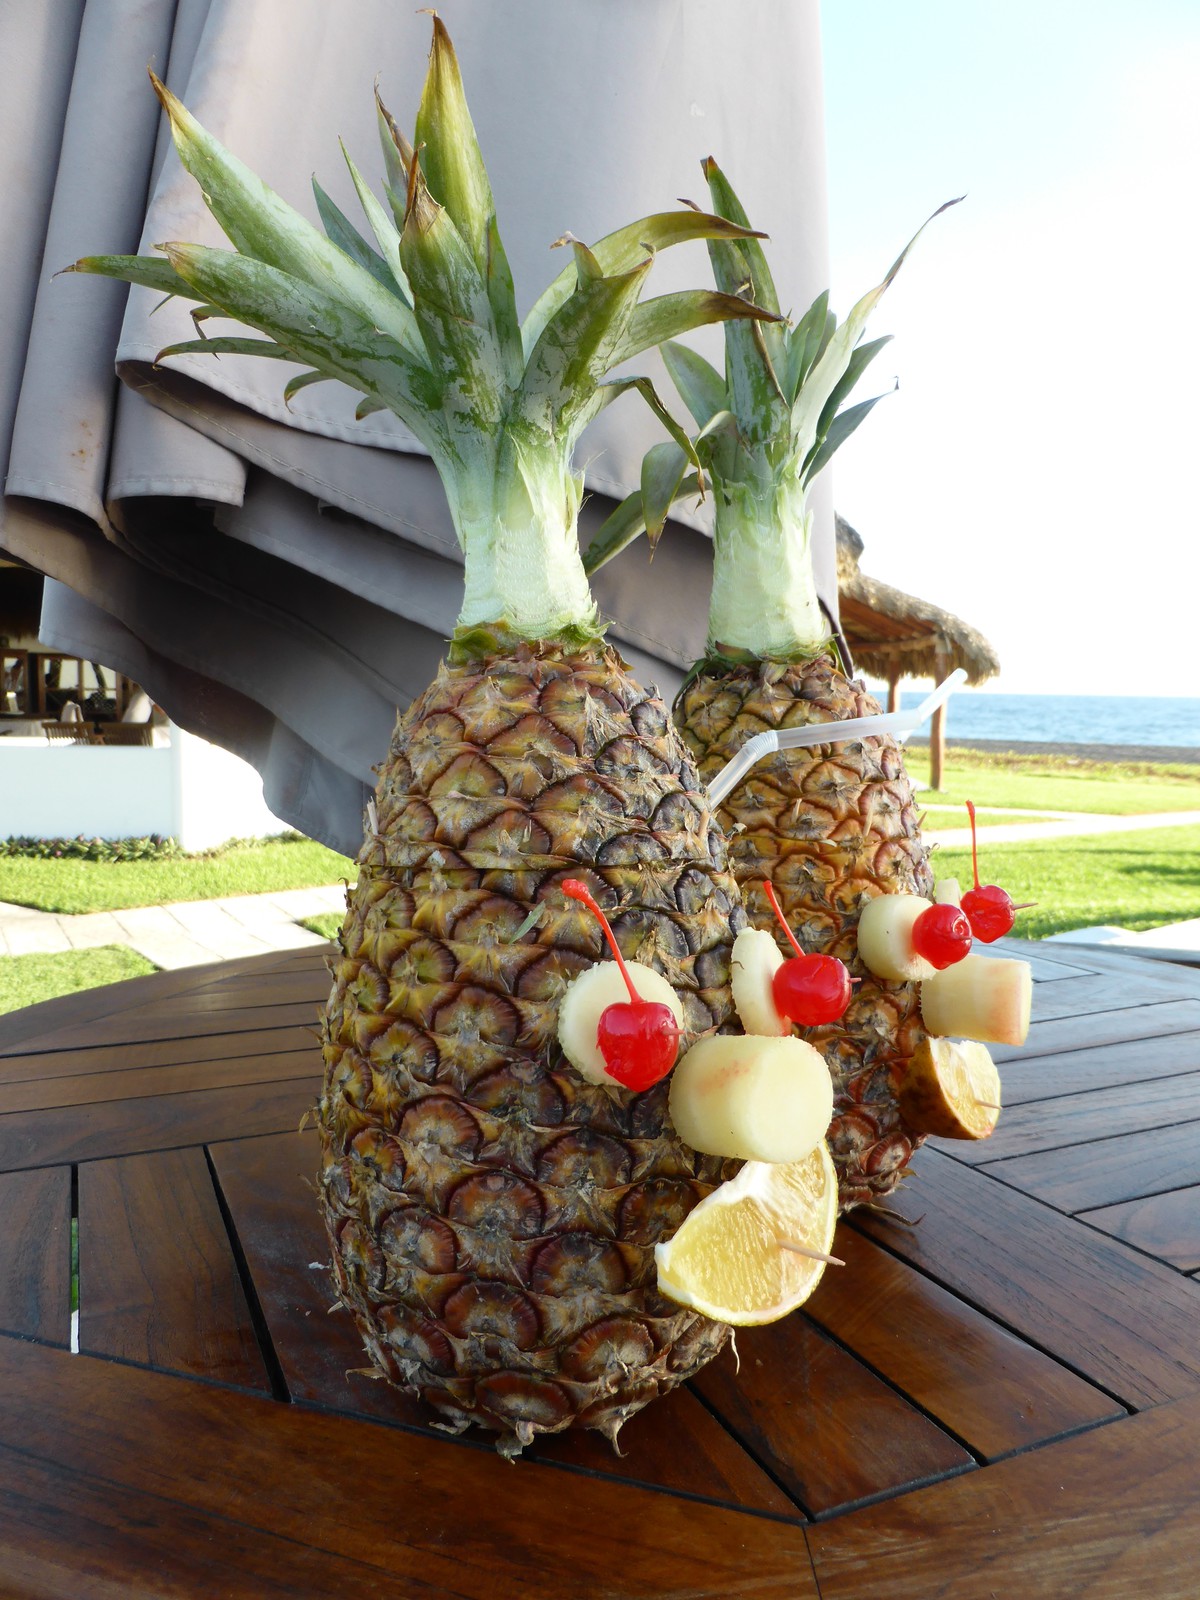 The piña coladas at Dos Mundos are served in cheerful pineapples